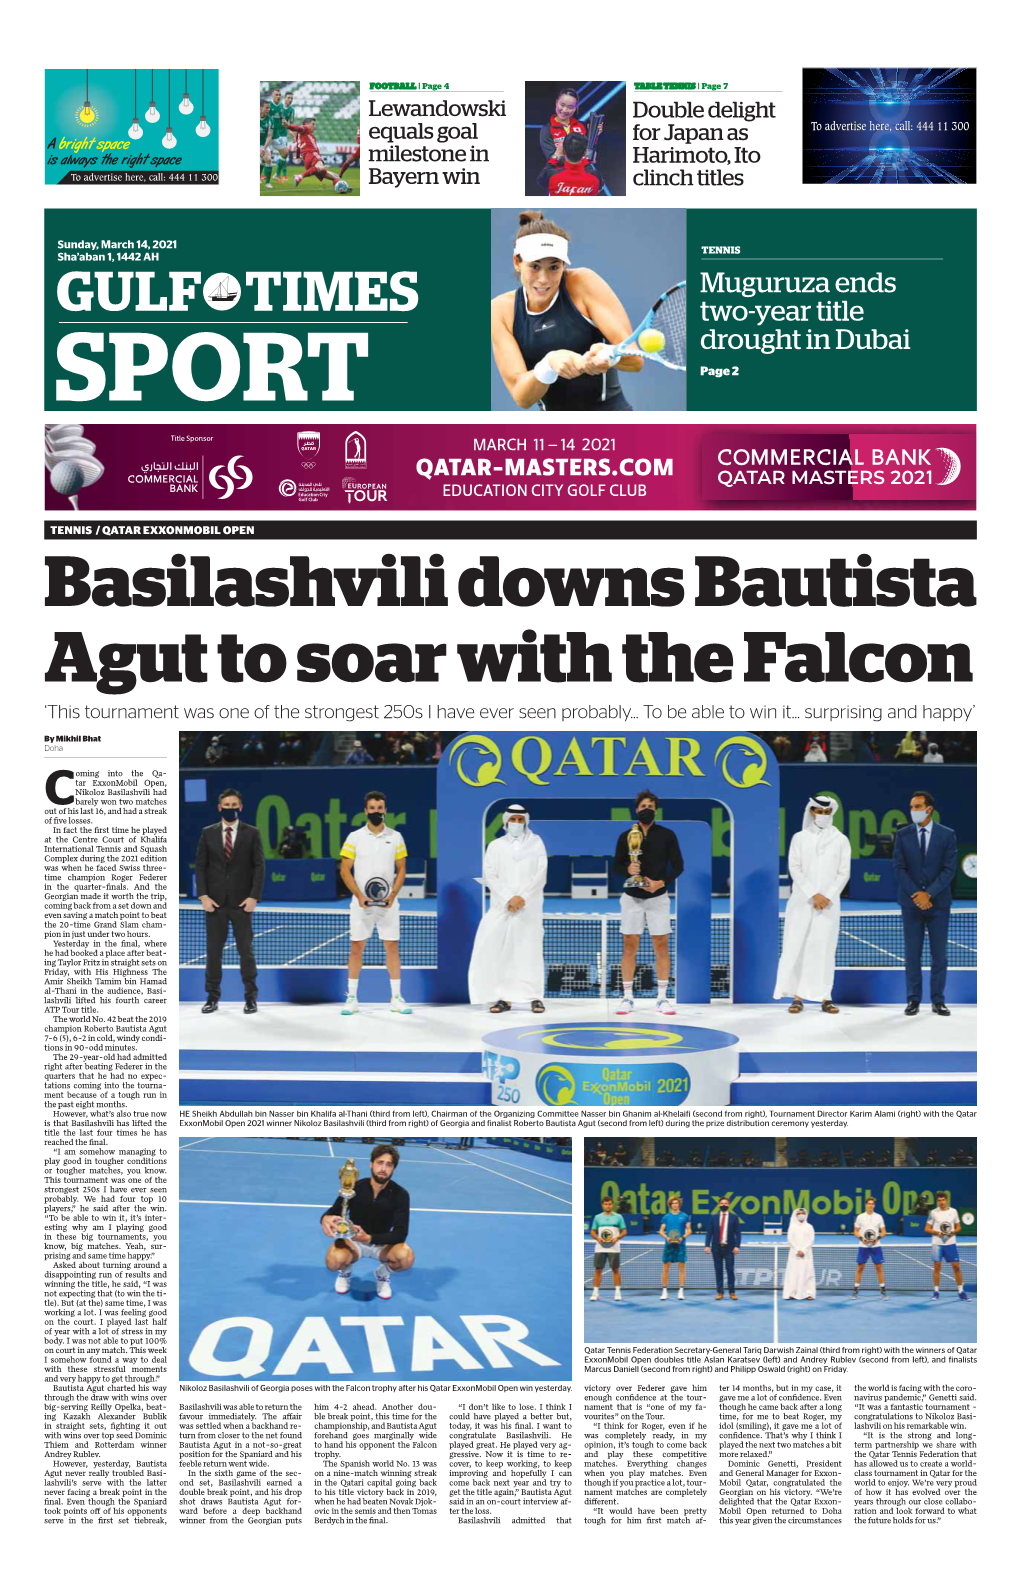 Basilashvili Downs Bautista Agut to Soar with the Falcon ‘This Tournament Was One of the Strongest 250S I Have Ever Seen Probably